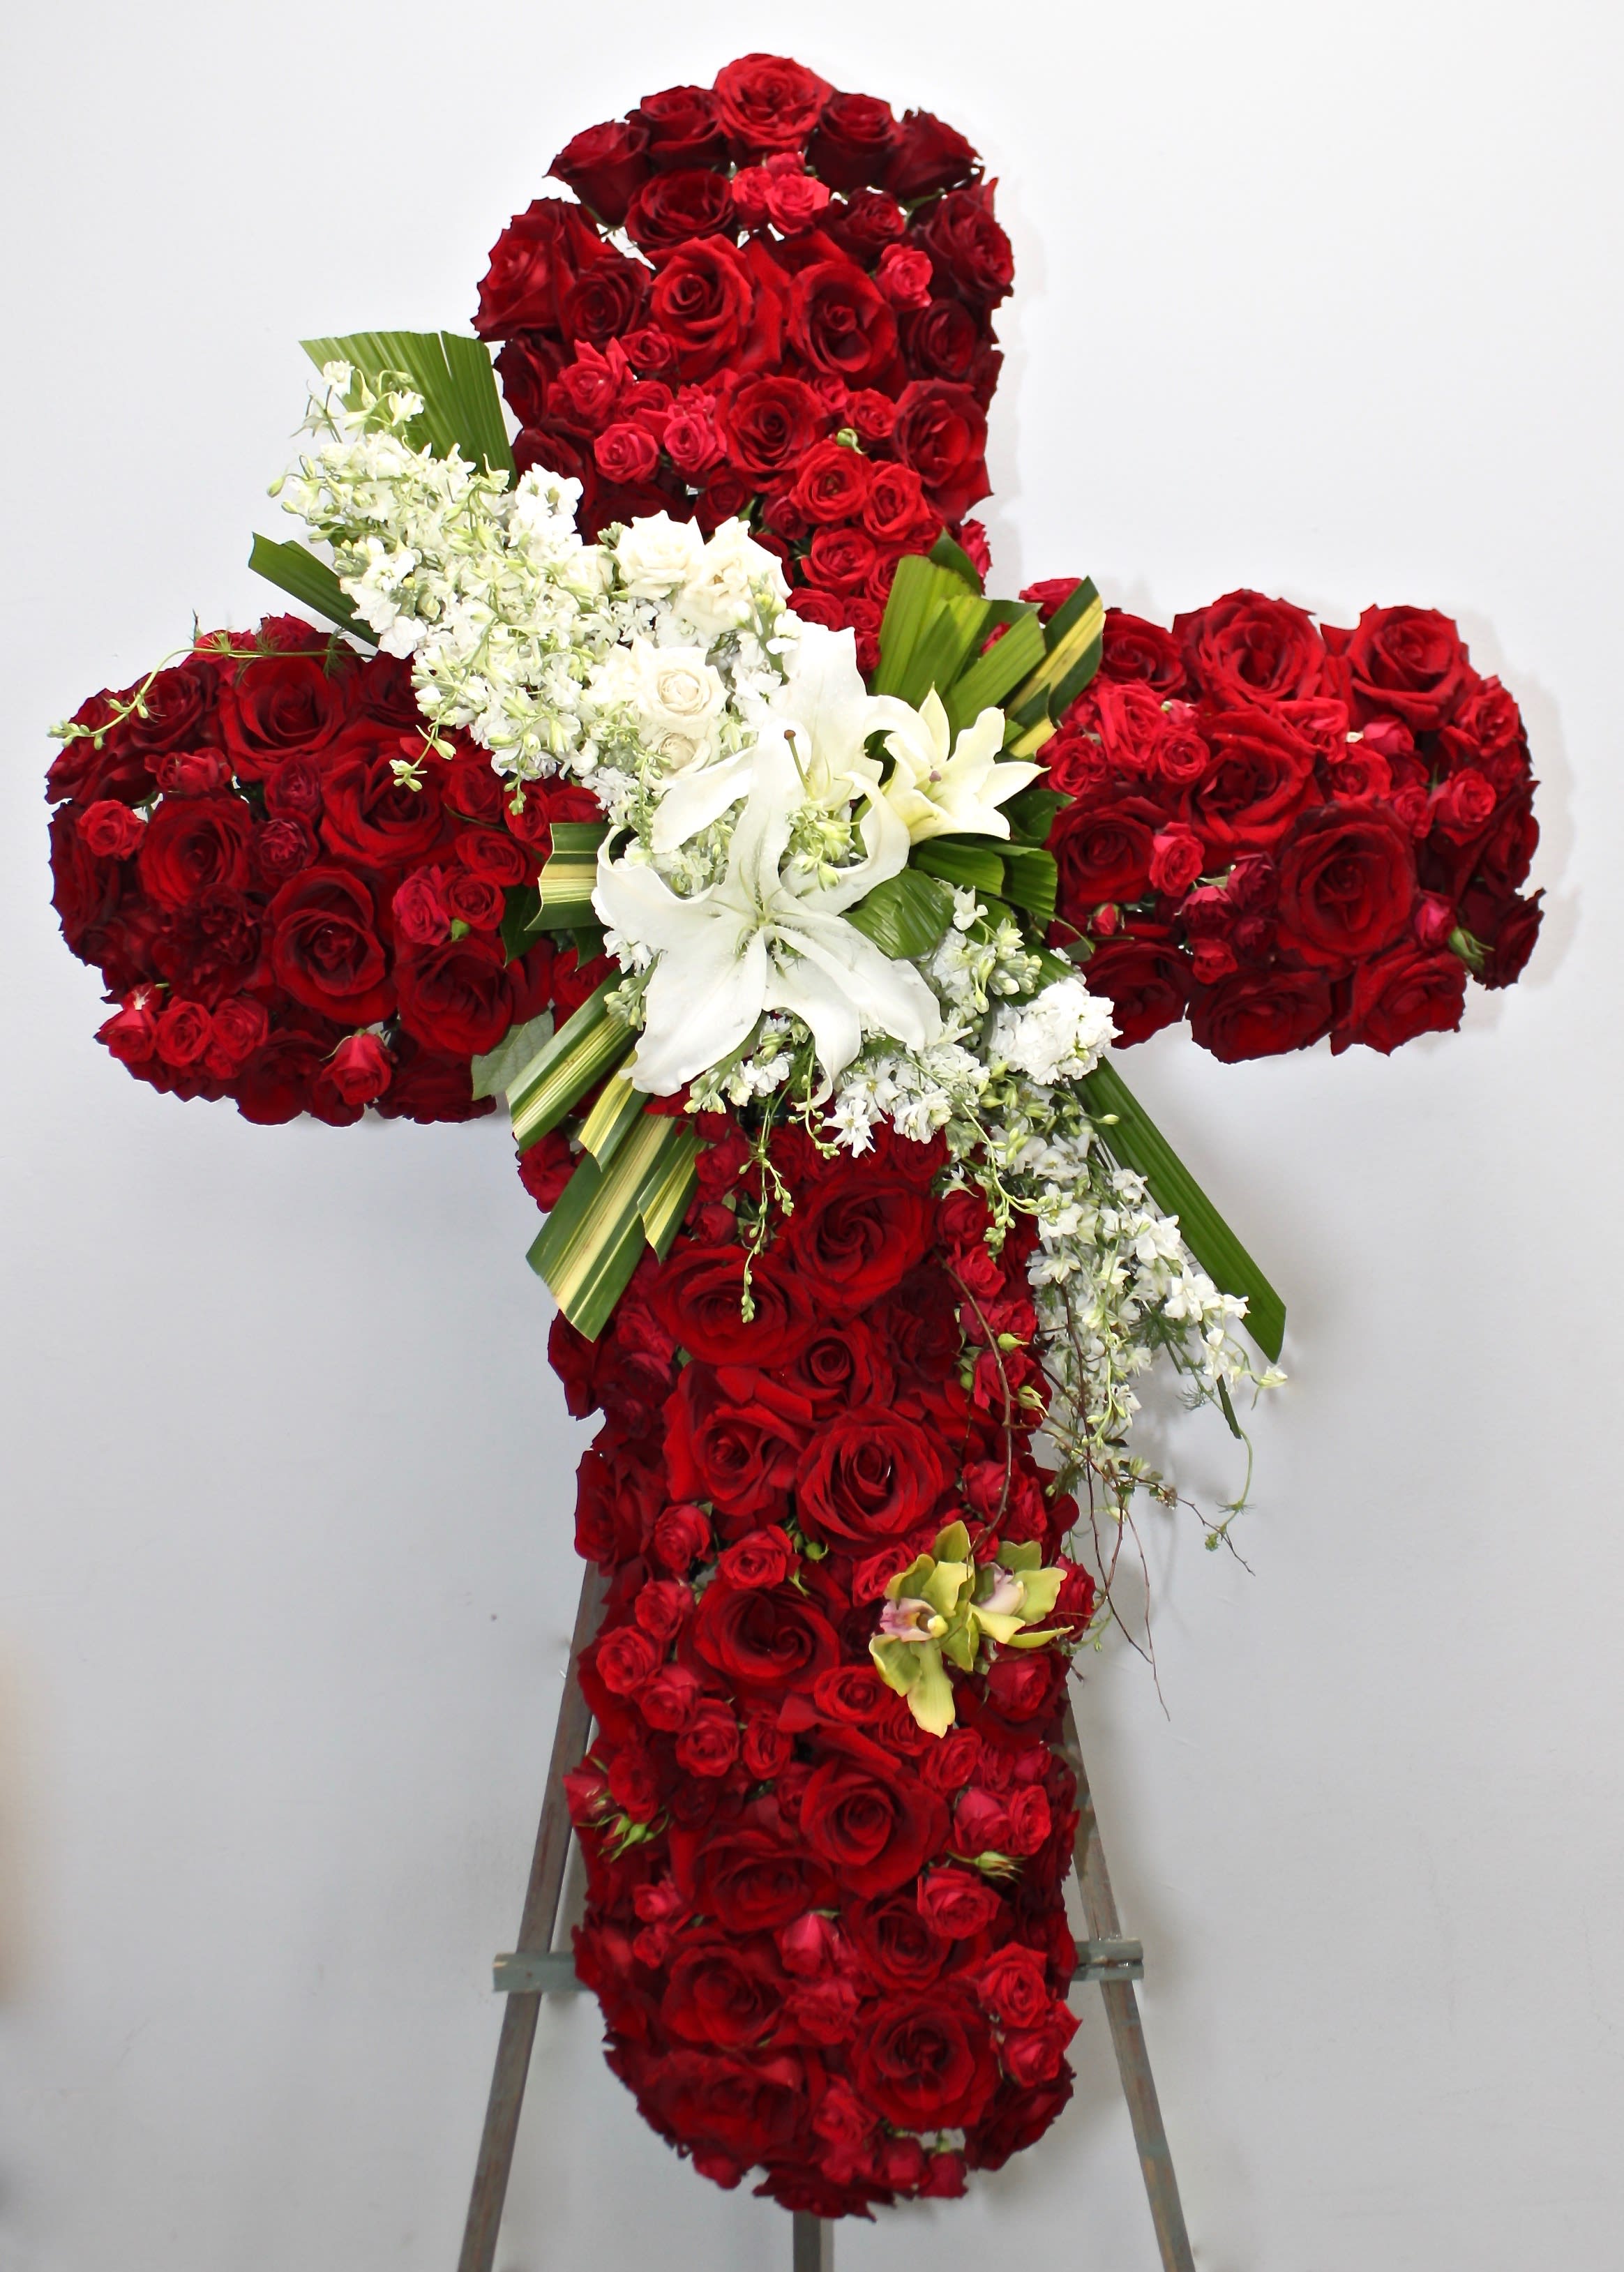 Red Rose Star Burst Cross  - This cross contains red roses of various sizes as well as a stargazer focal point. Seasonal greens and florals are also included in this cross.   We include easel, printed banner and delivery (some fees may apply).  Standard size is 30'', deluxe is 36'', and premium is 42''.